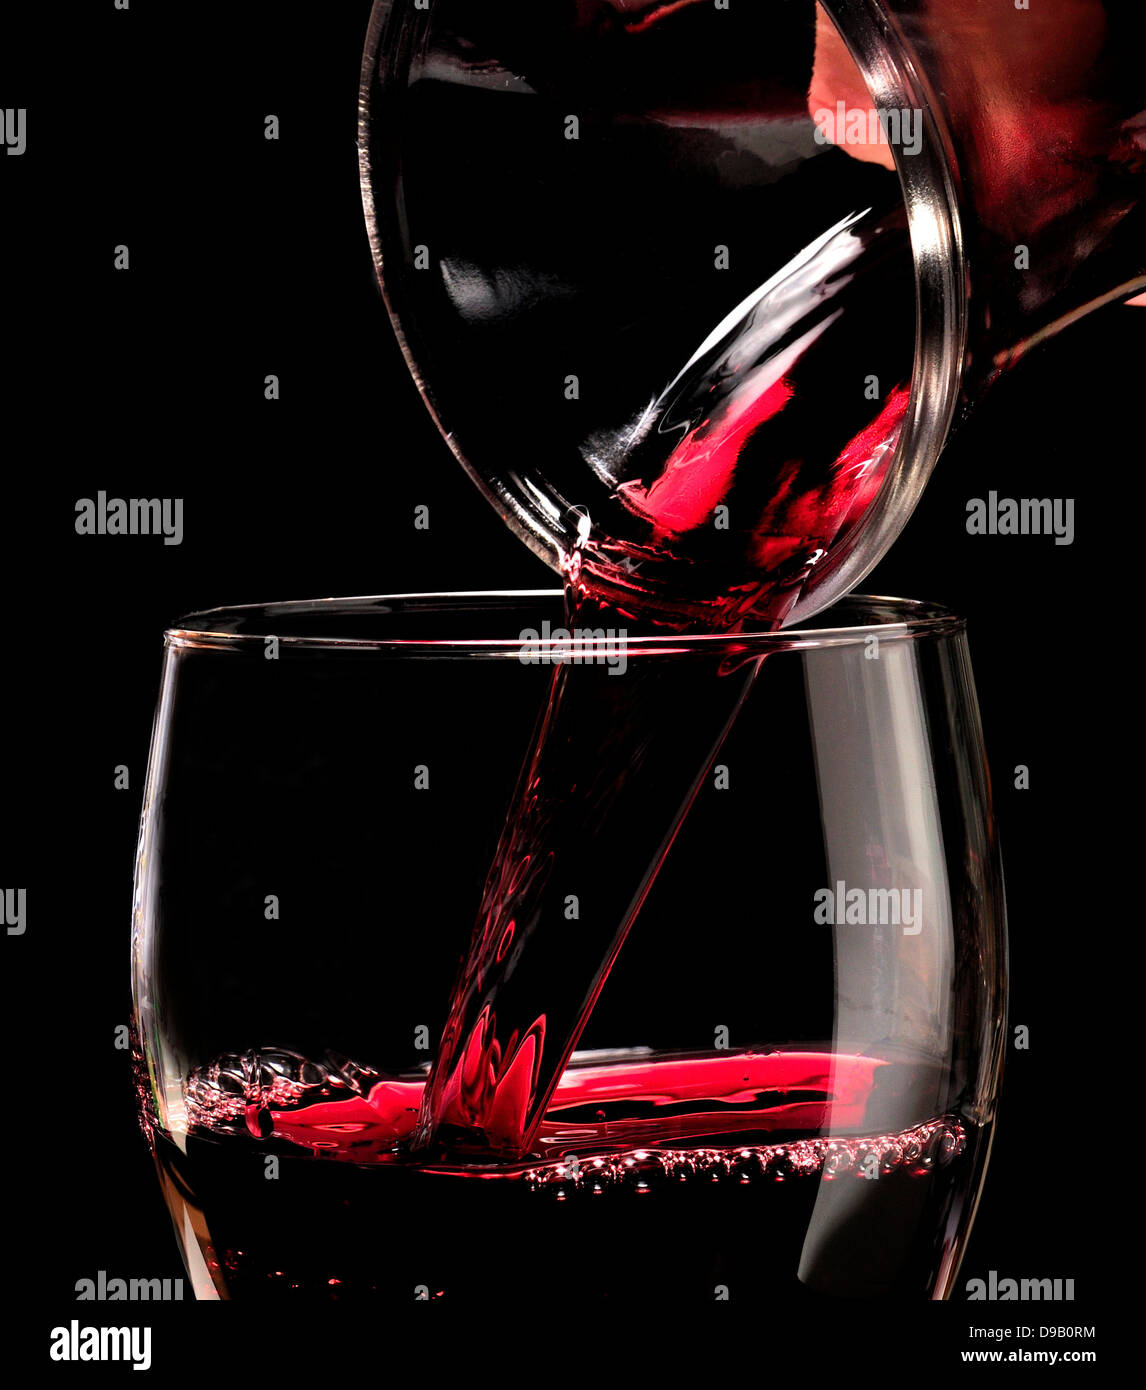 Red wine pouring into a glass from a carafe Stock Photo